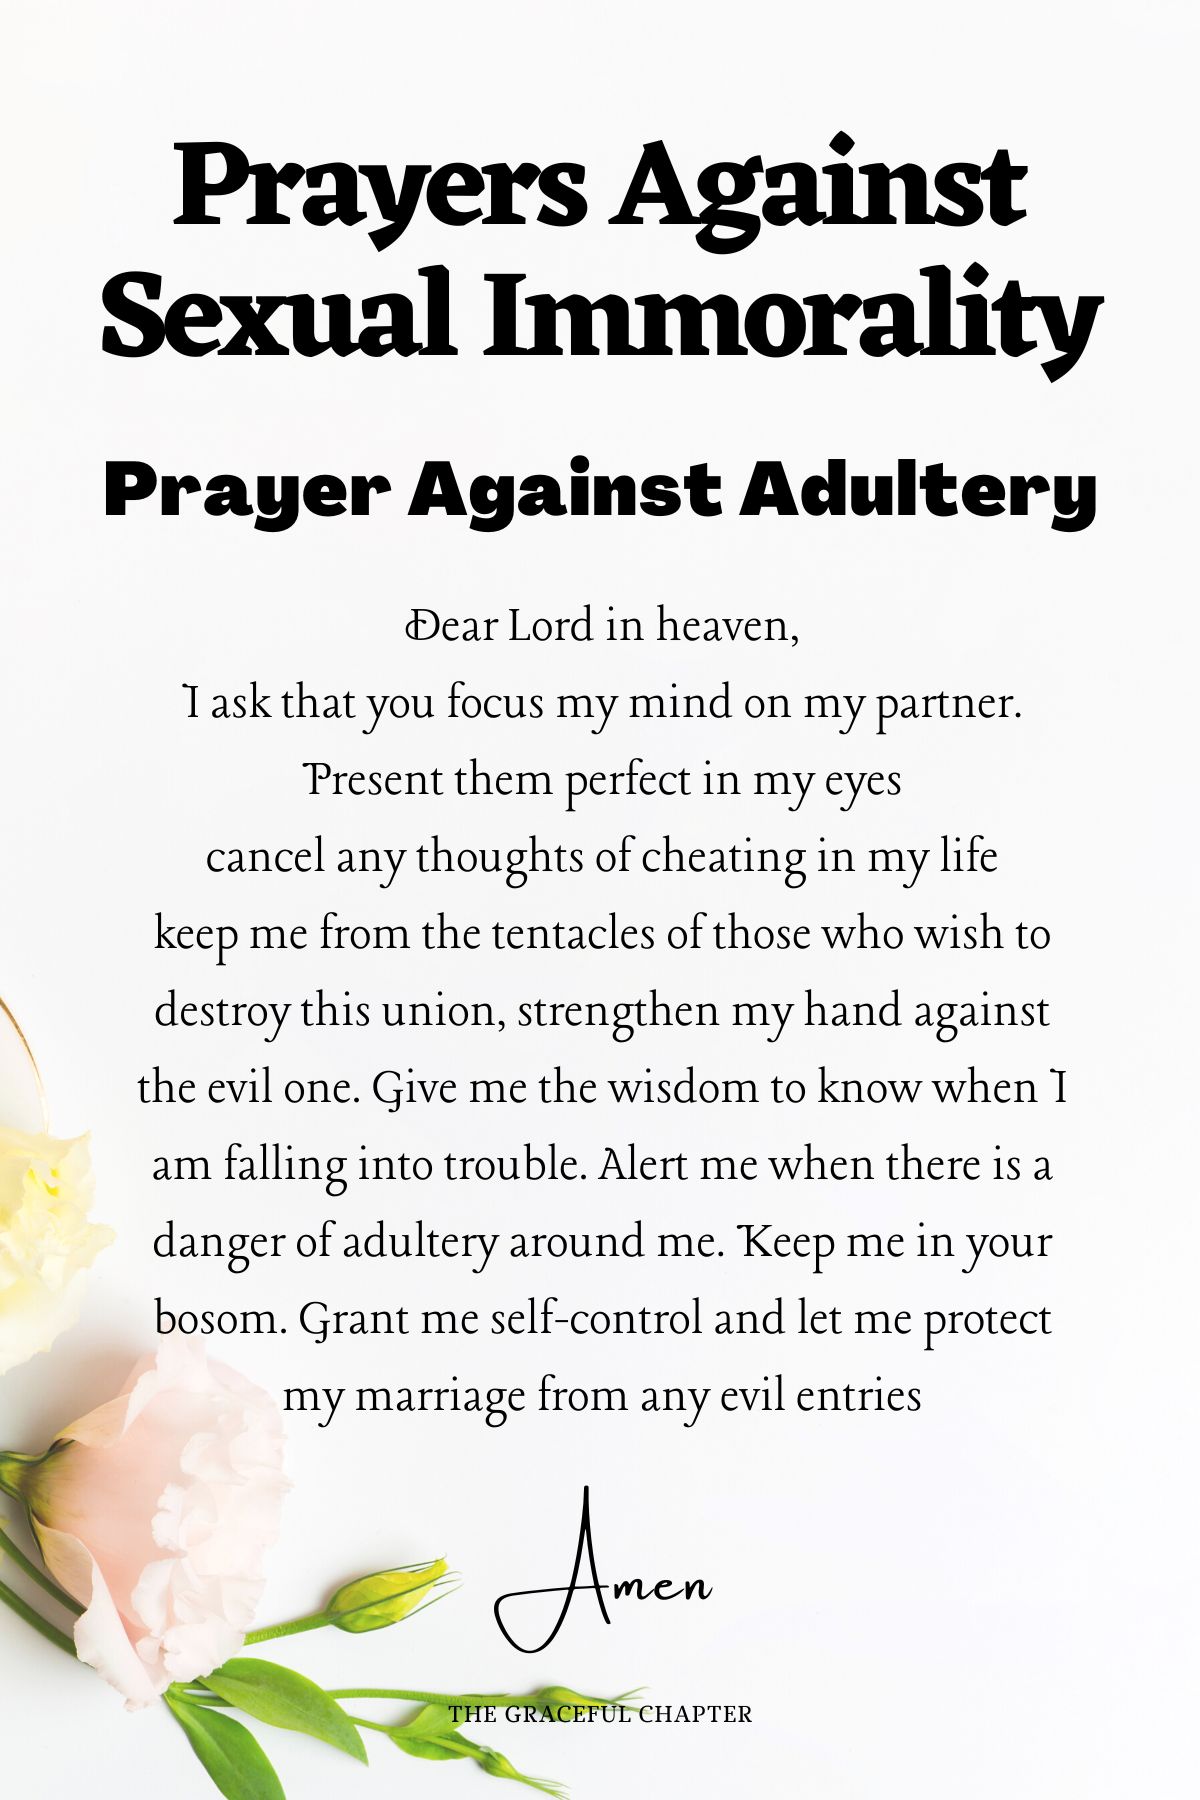 Prayer against adultery - 10 Effective Prayers Against Sexual Immorality